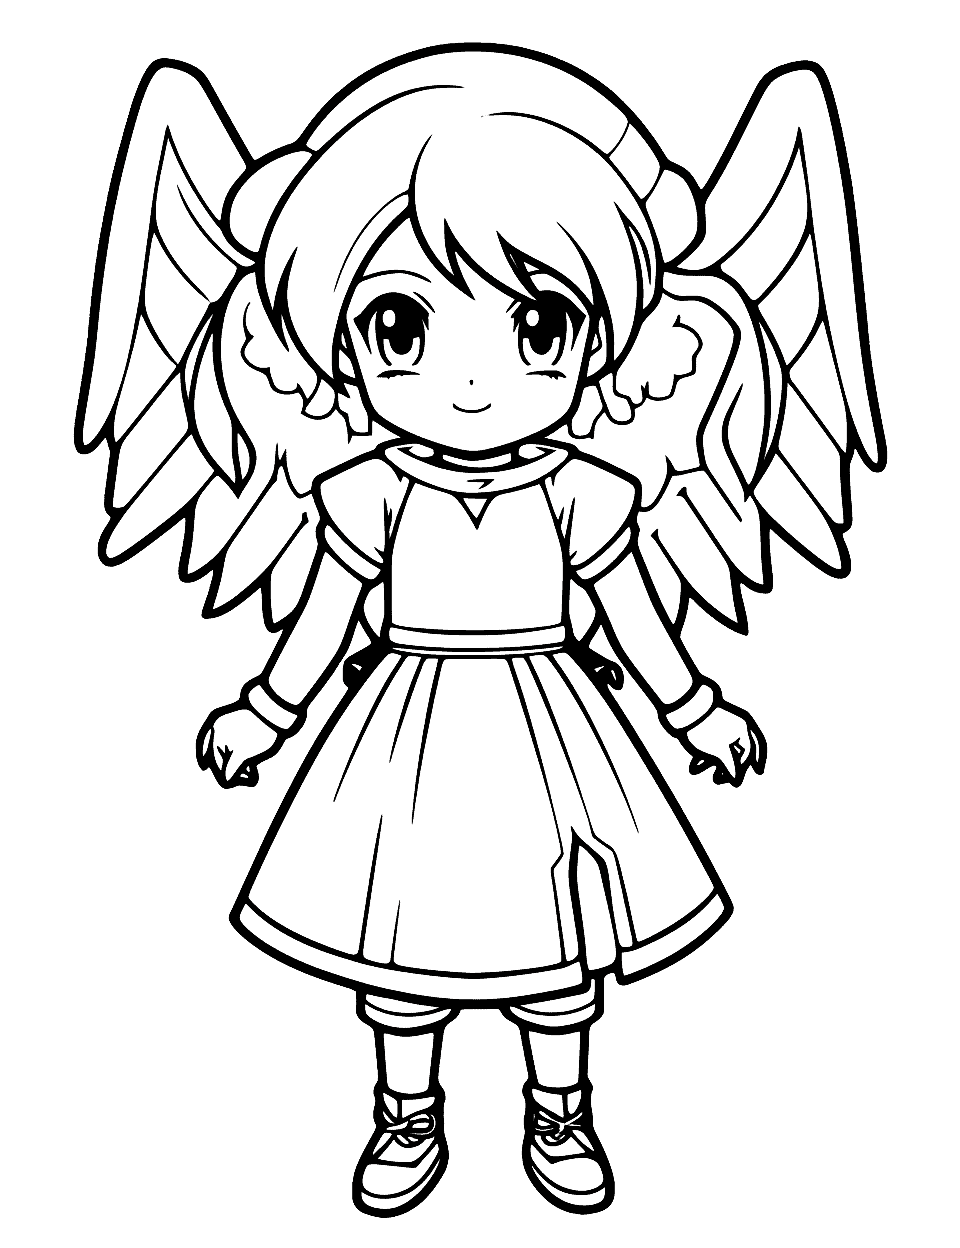 Printable Anime Coloring Pages | ColoringMe.com